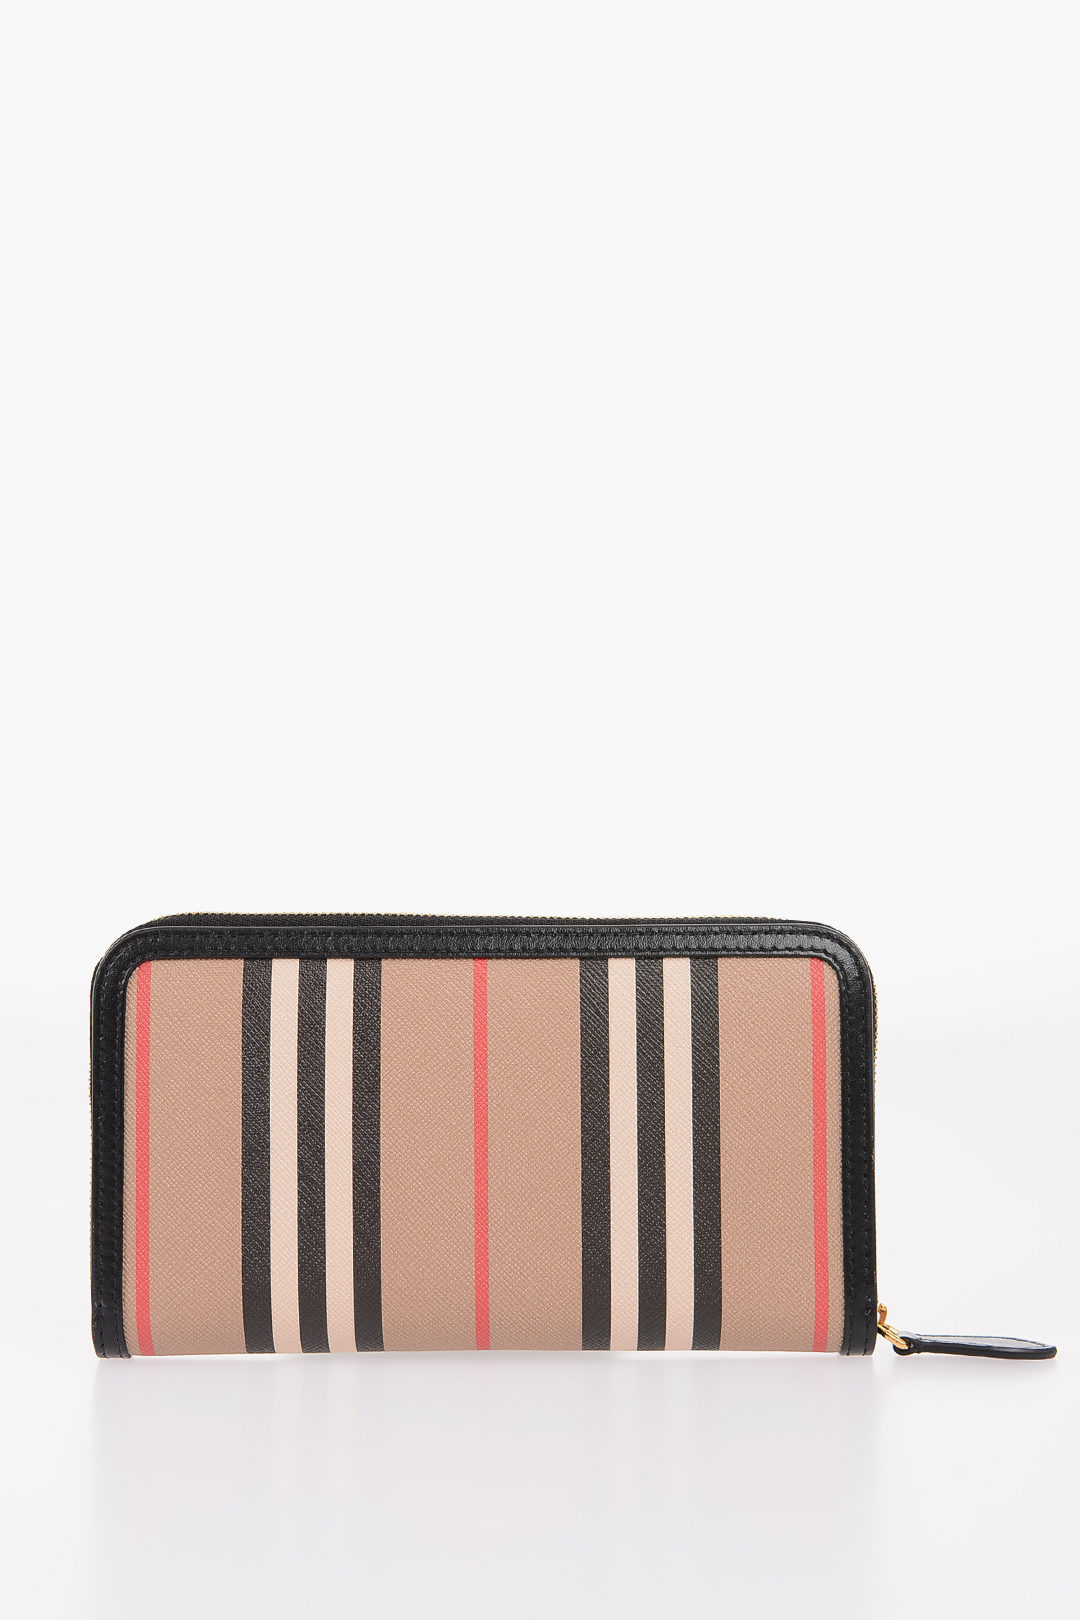 Burberry Iconic Printed Leather ELMORE Wallet women - Glamood Outlet